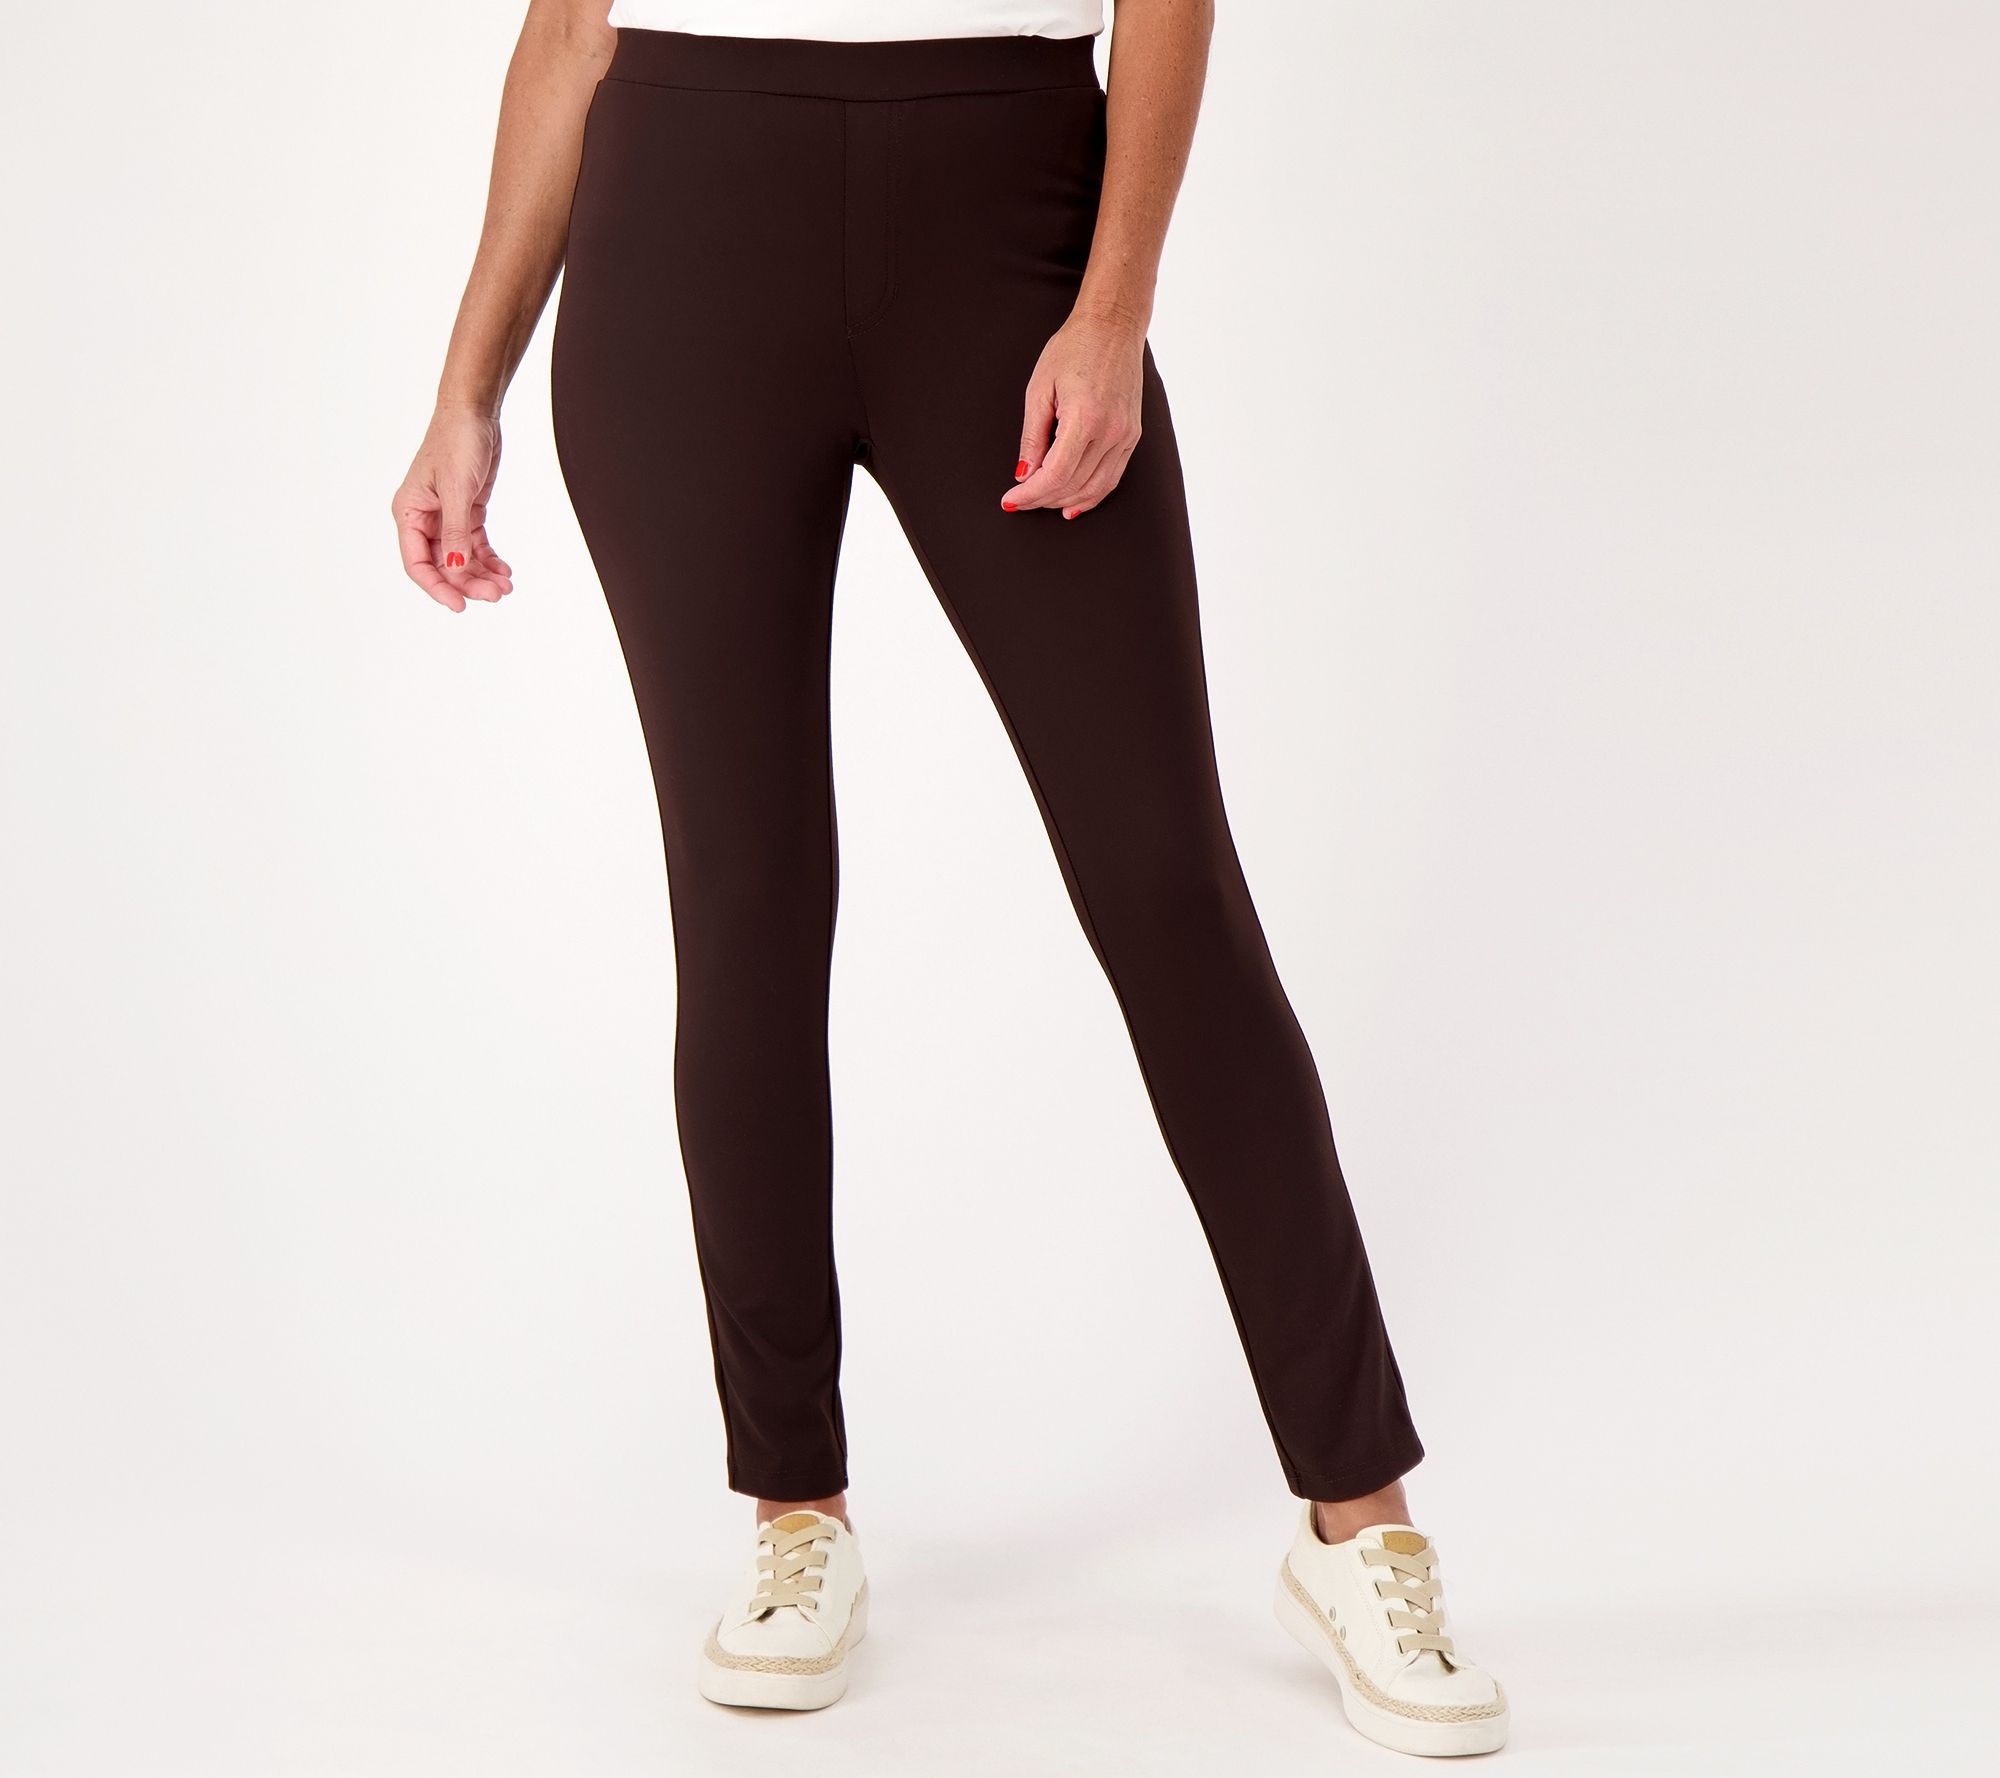 Denim & Co. Active Regular Printed Duo Stretch Legging with Pintuck